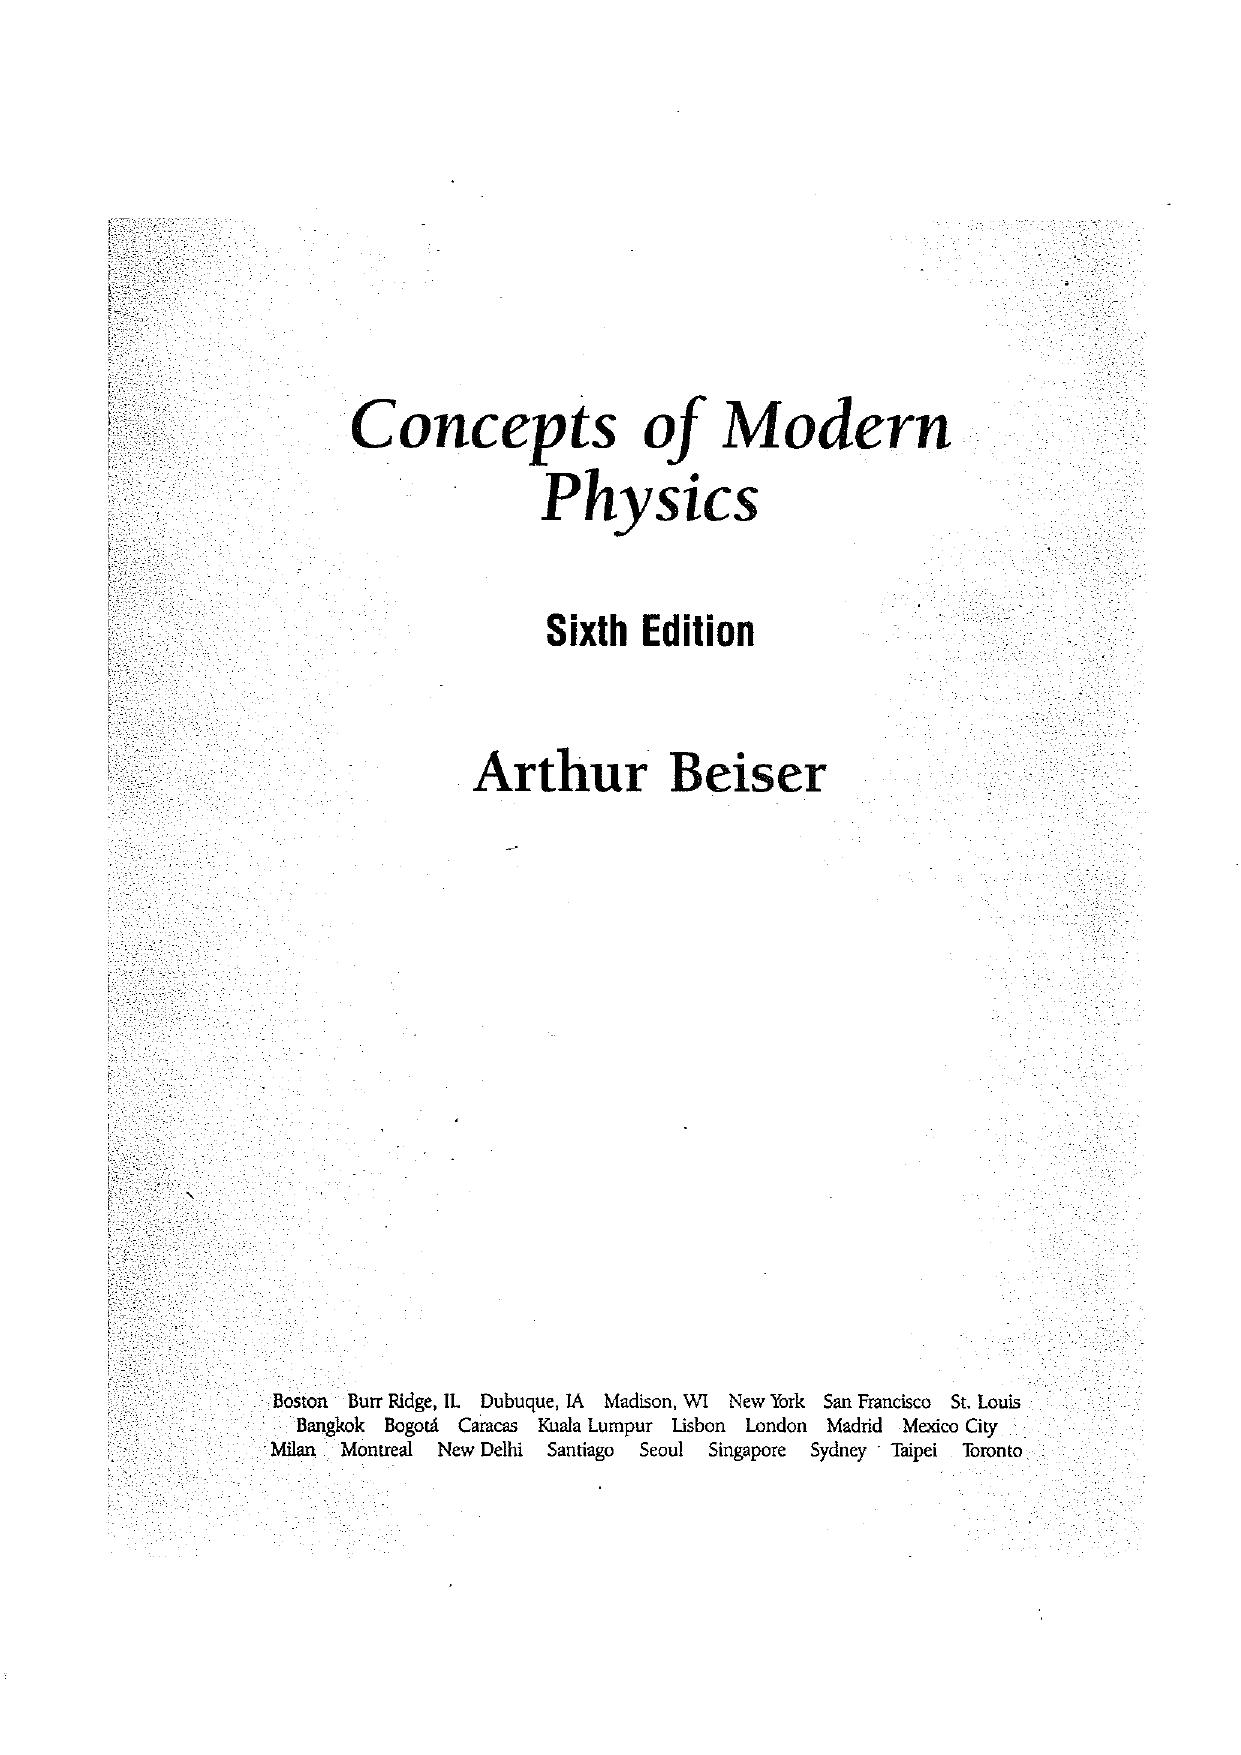 Concepts of Modern Physics by Beiser 2003